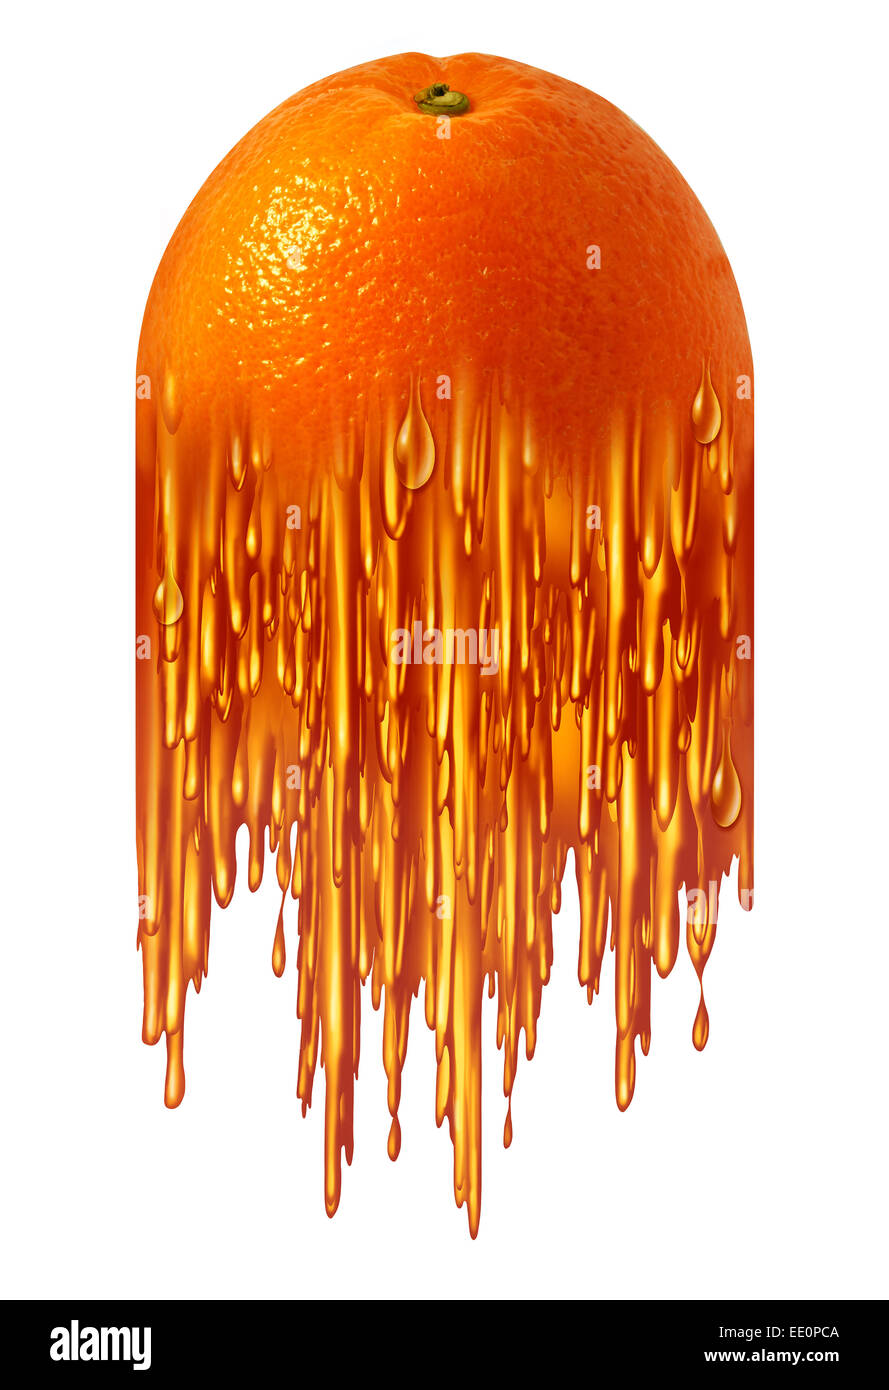 Orange juice symbol as a tropical fruit transforming into sweet liquid as a food icon for breakfast beverage or healthy nutritios food ingredient. Stock Photo